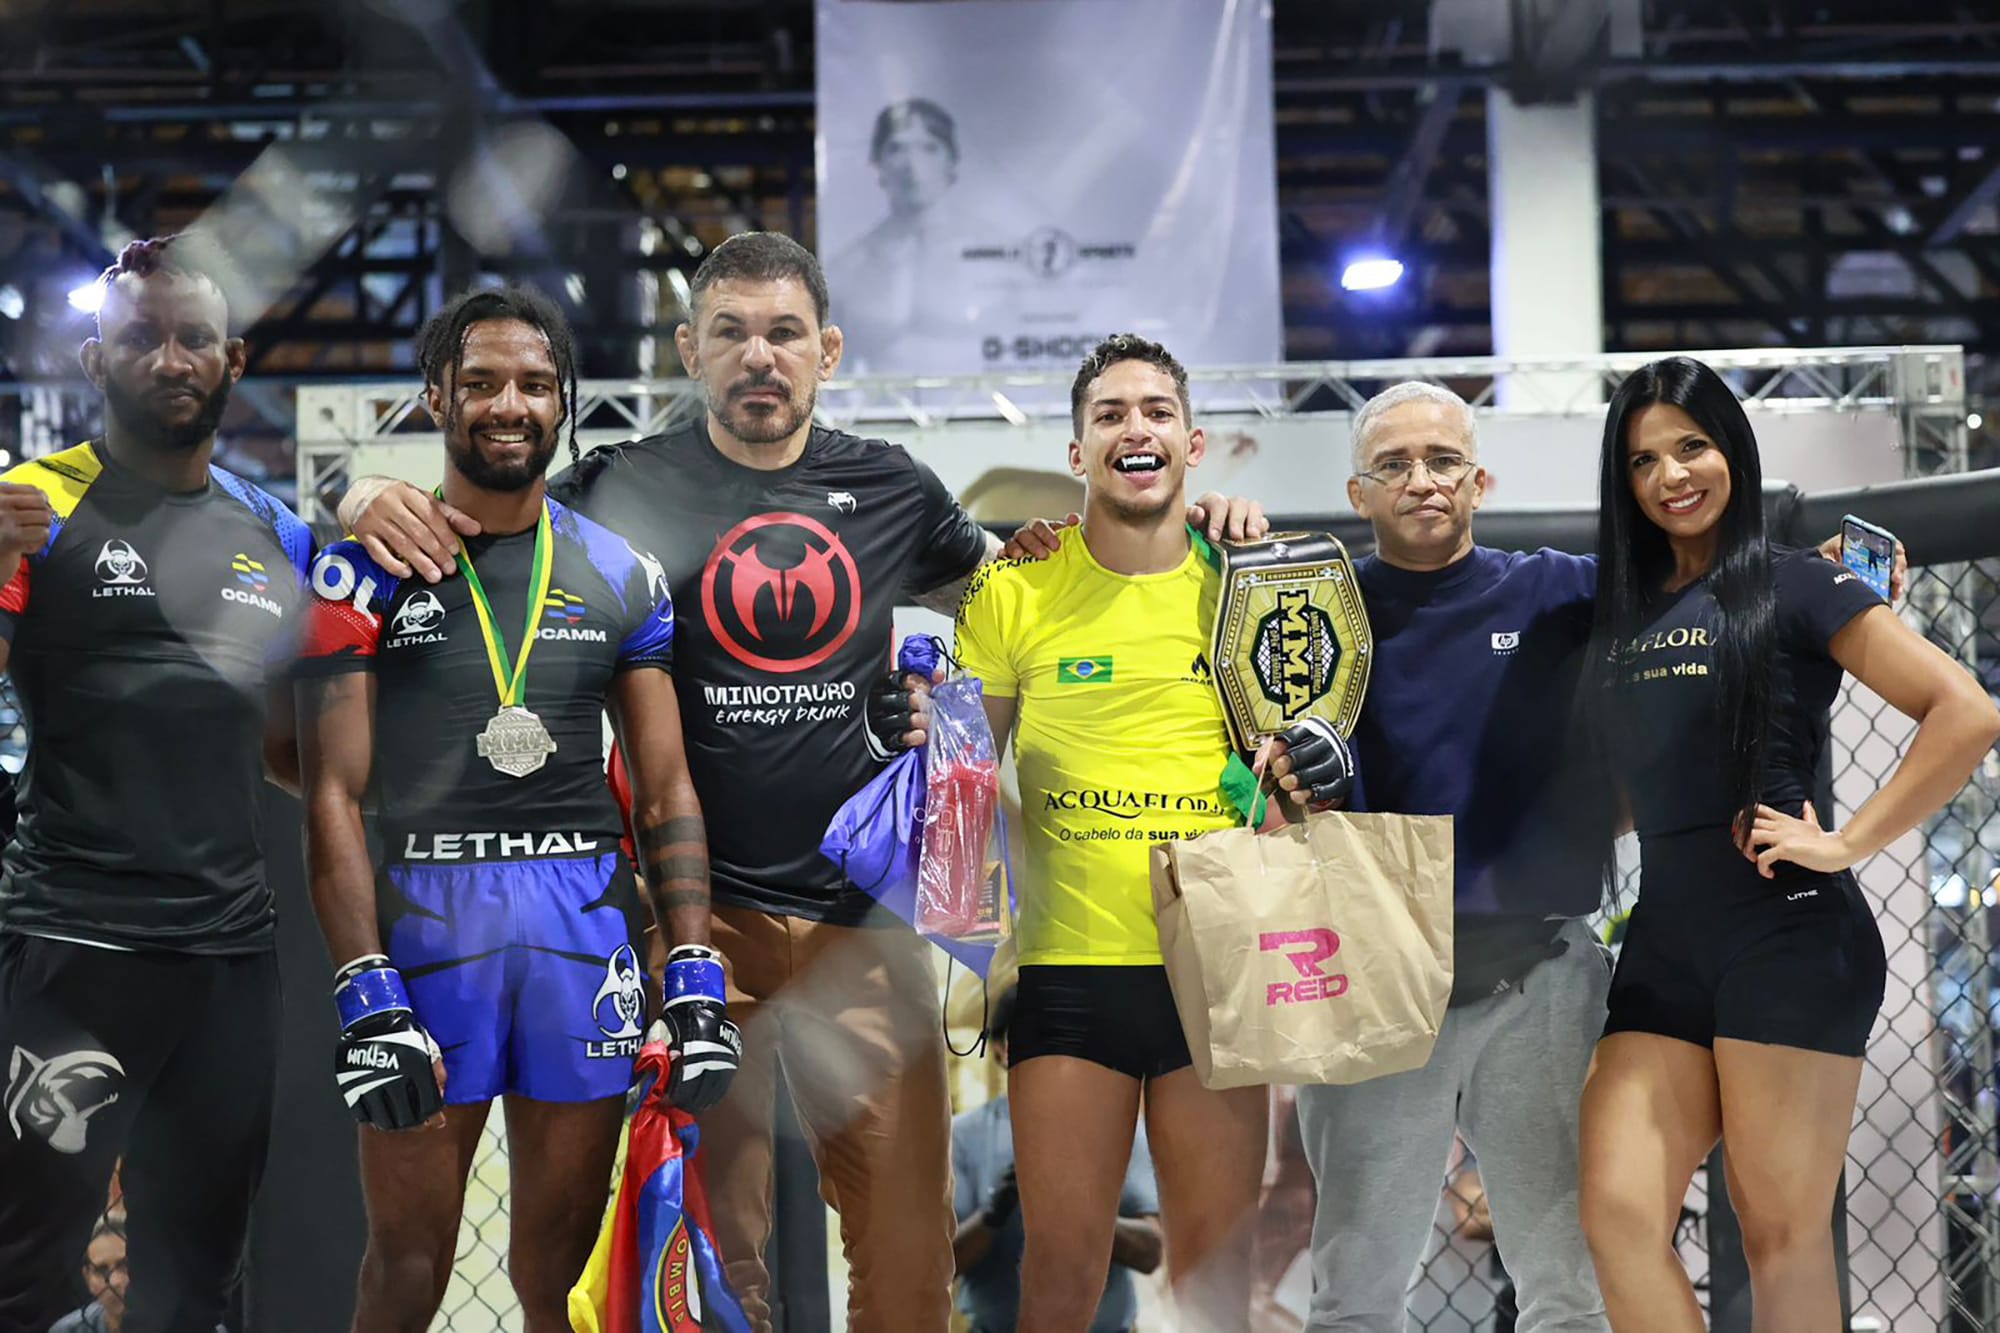 Nogueira and Ribas attend landmark amateur MMA event in Brazil